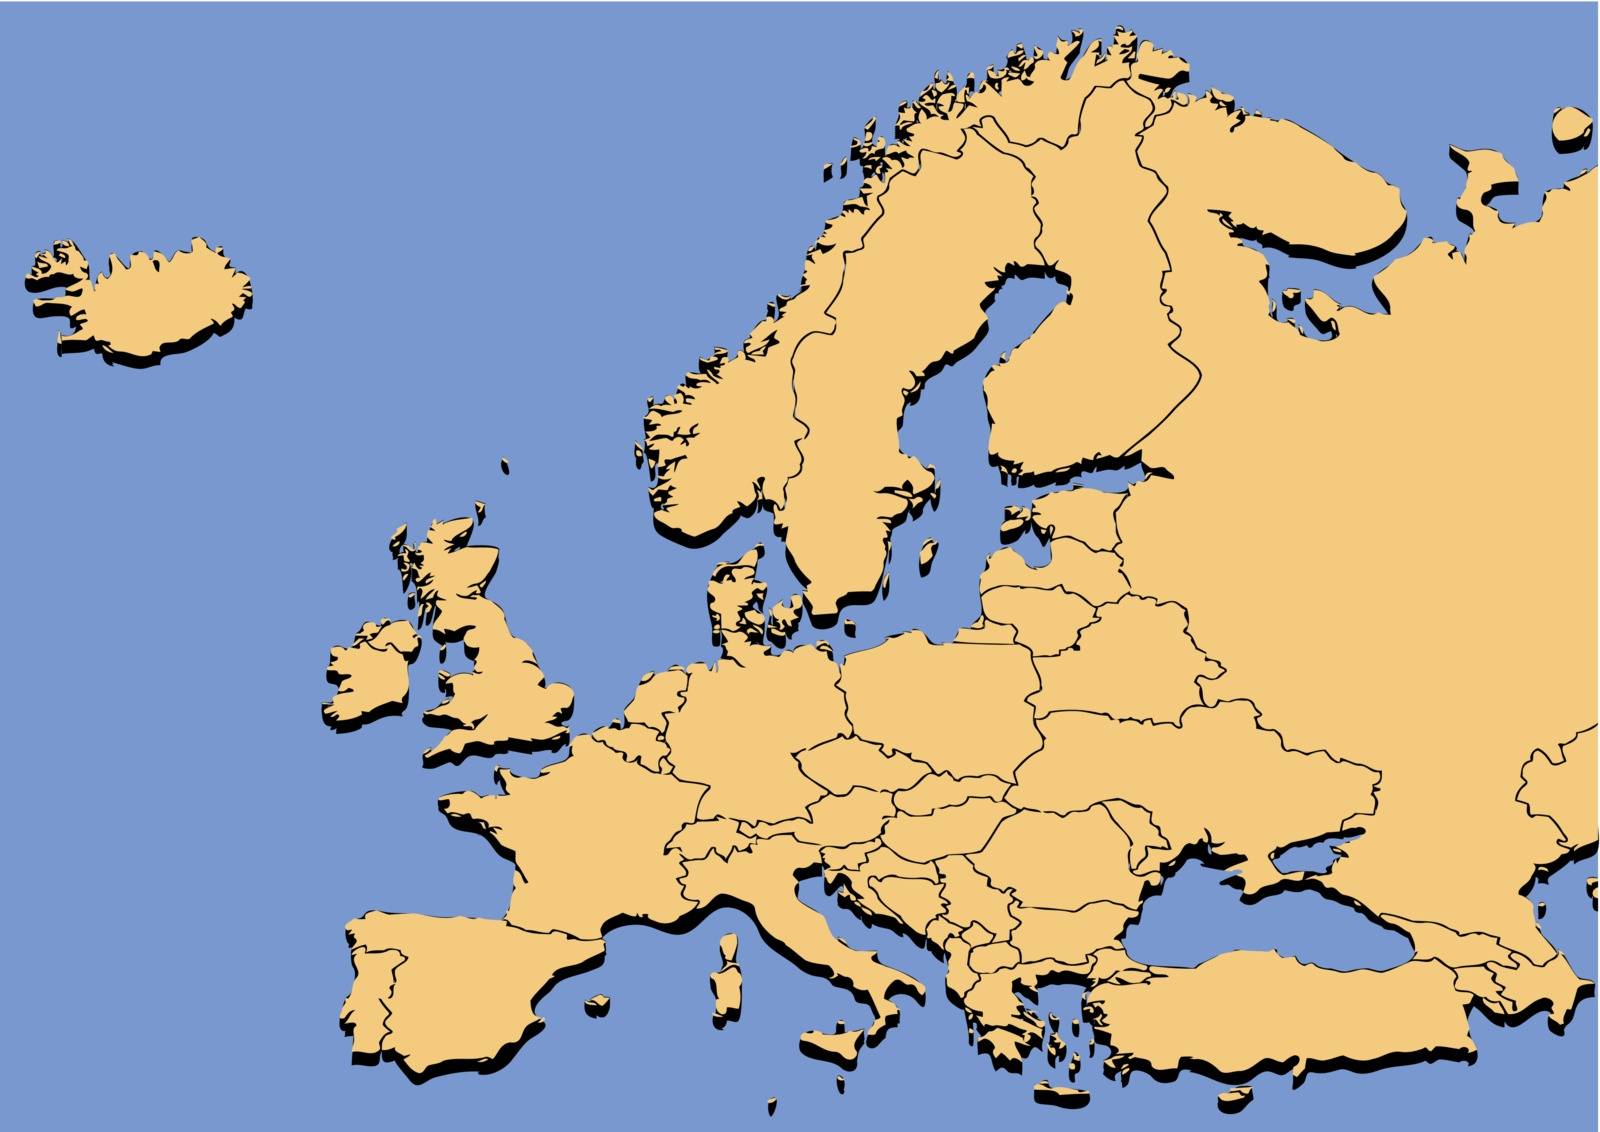 map of europe on a blue background.